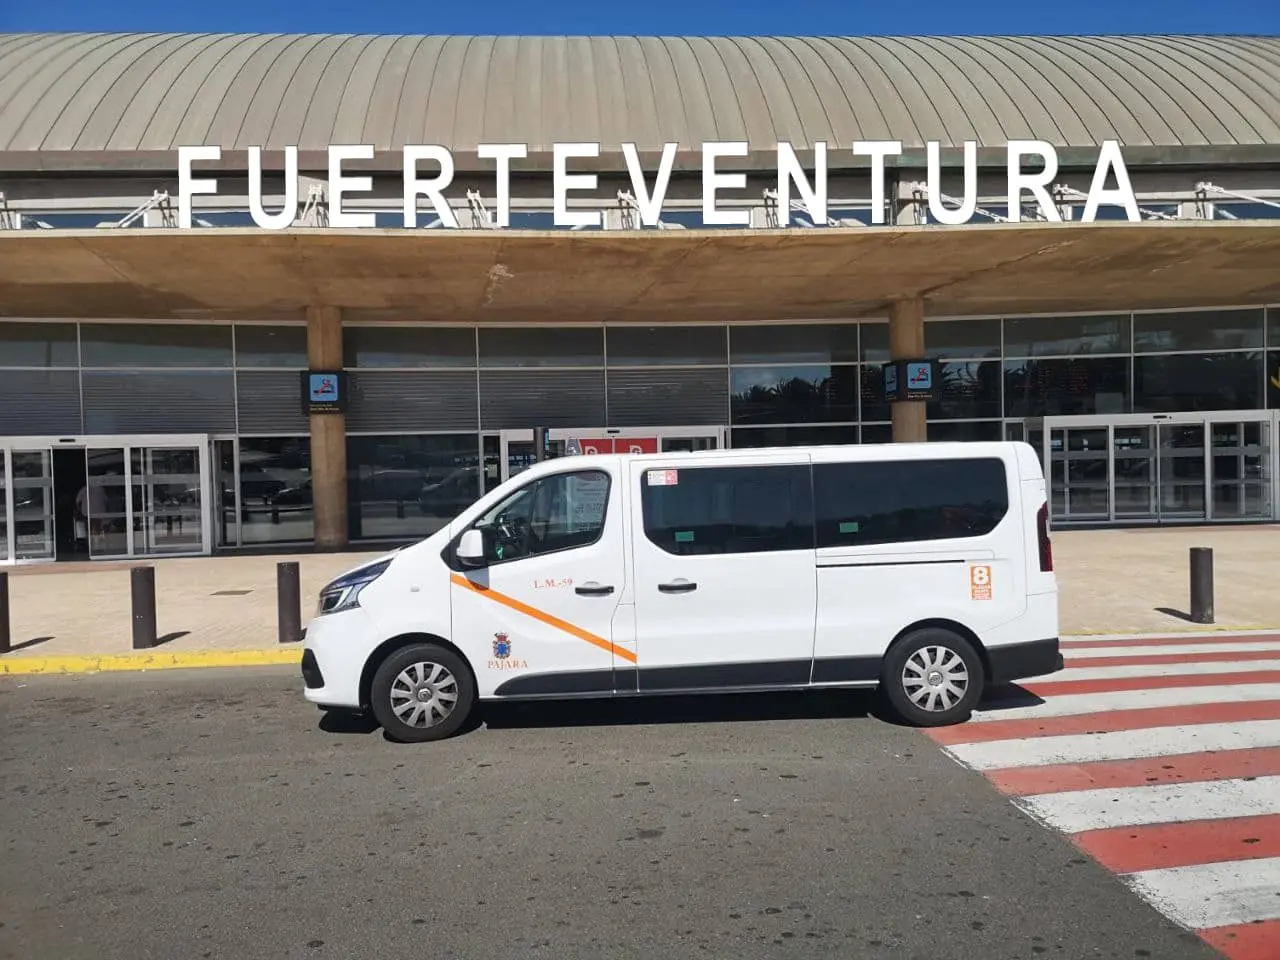 how to book a taxi in fuerteventura - Is it cheaper to book a taxi in advance